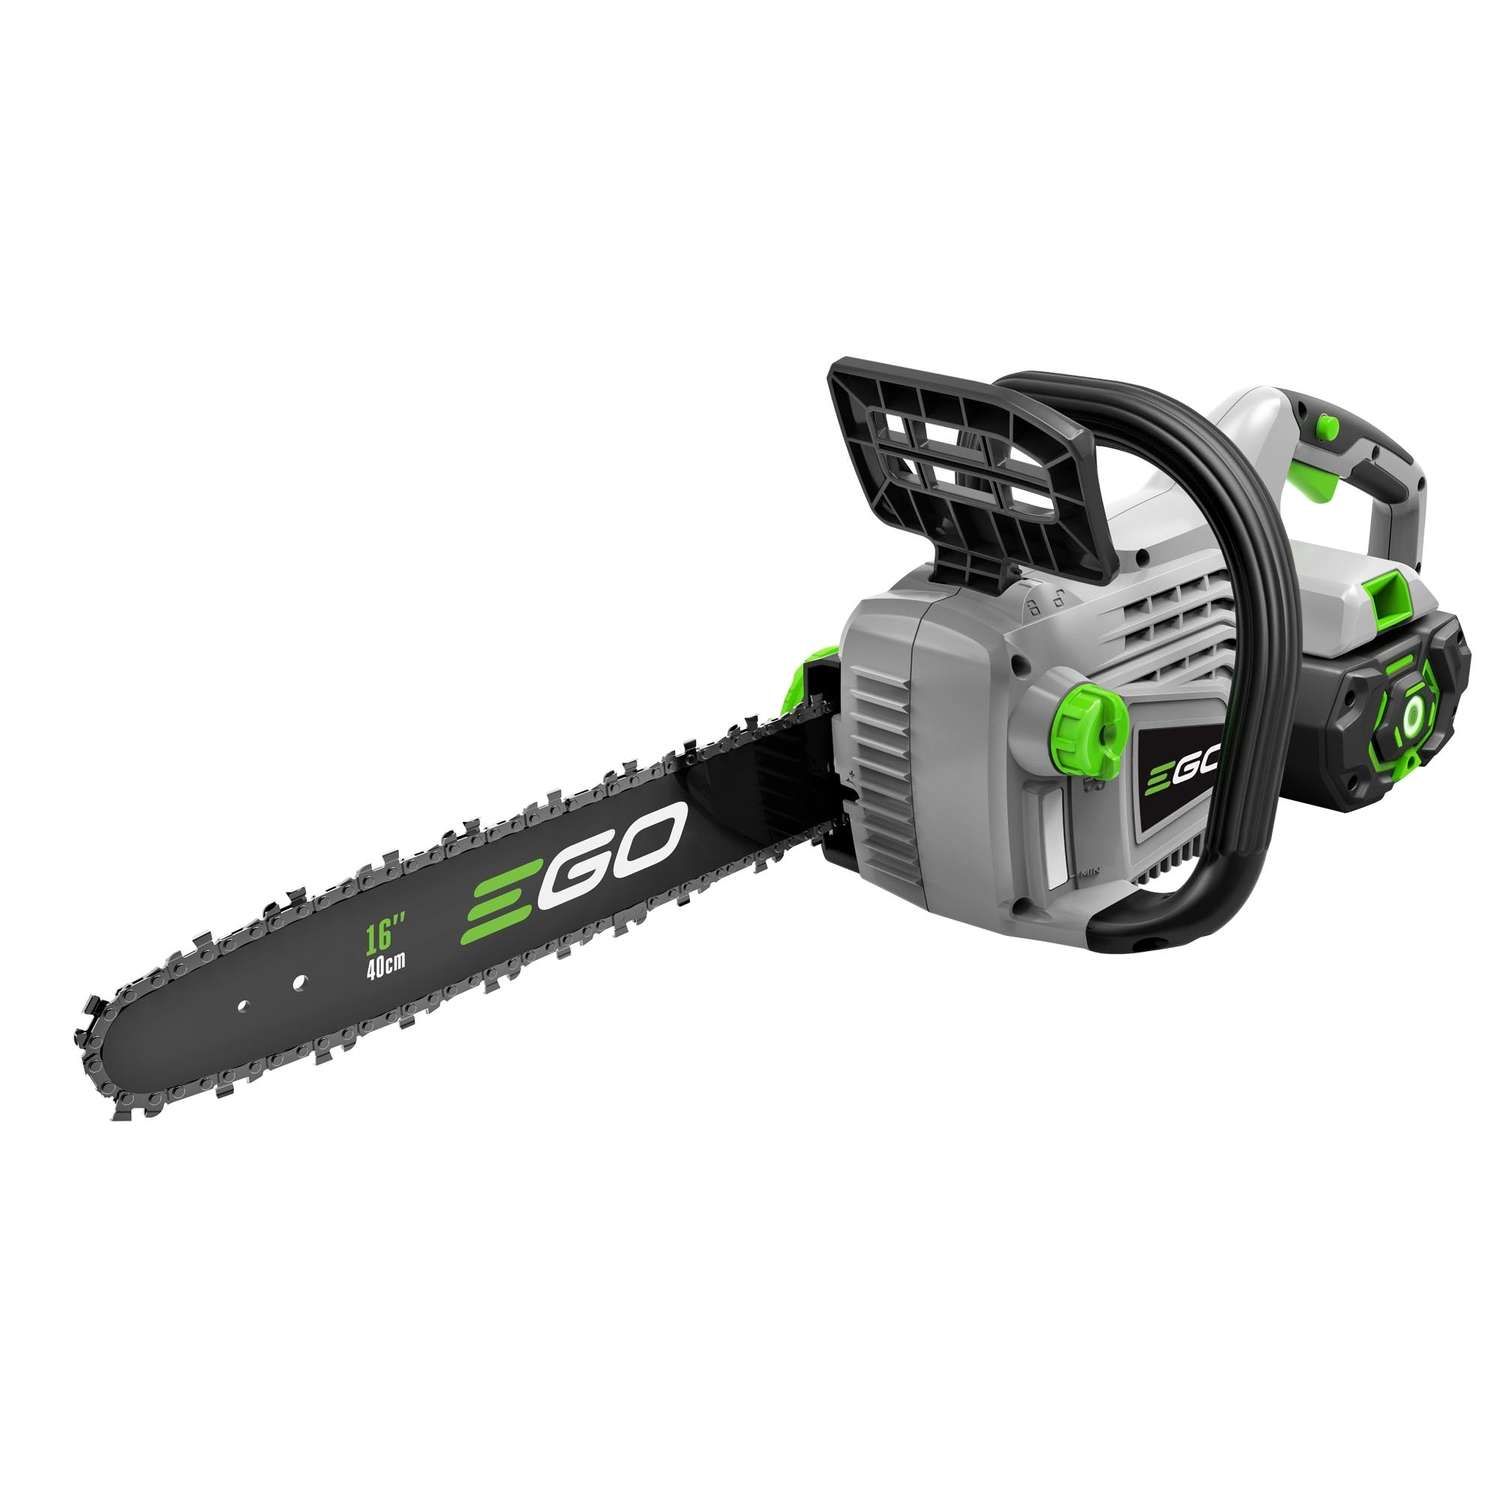 EGO Power+ CS1604 16 in. 56 volt Battery Chainsaw Kit